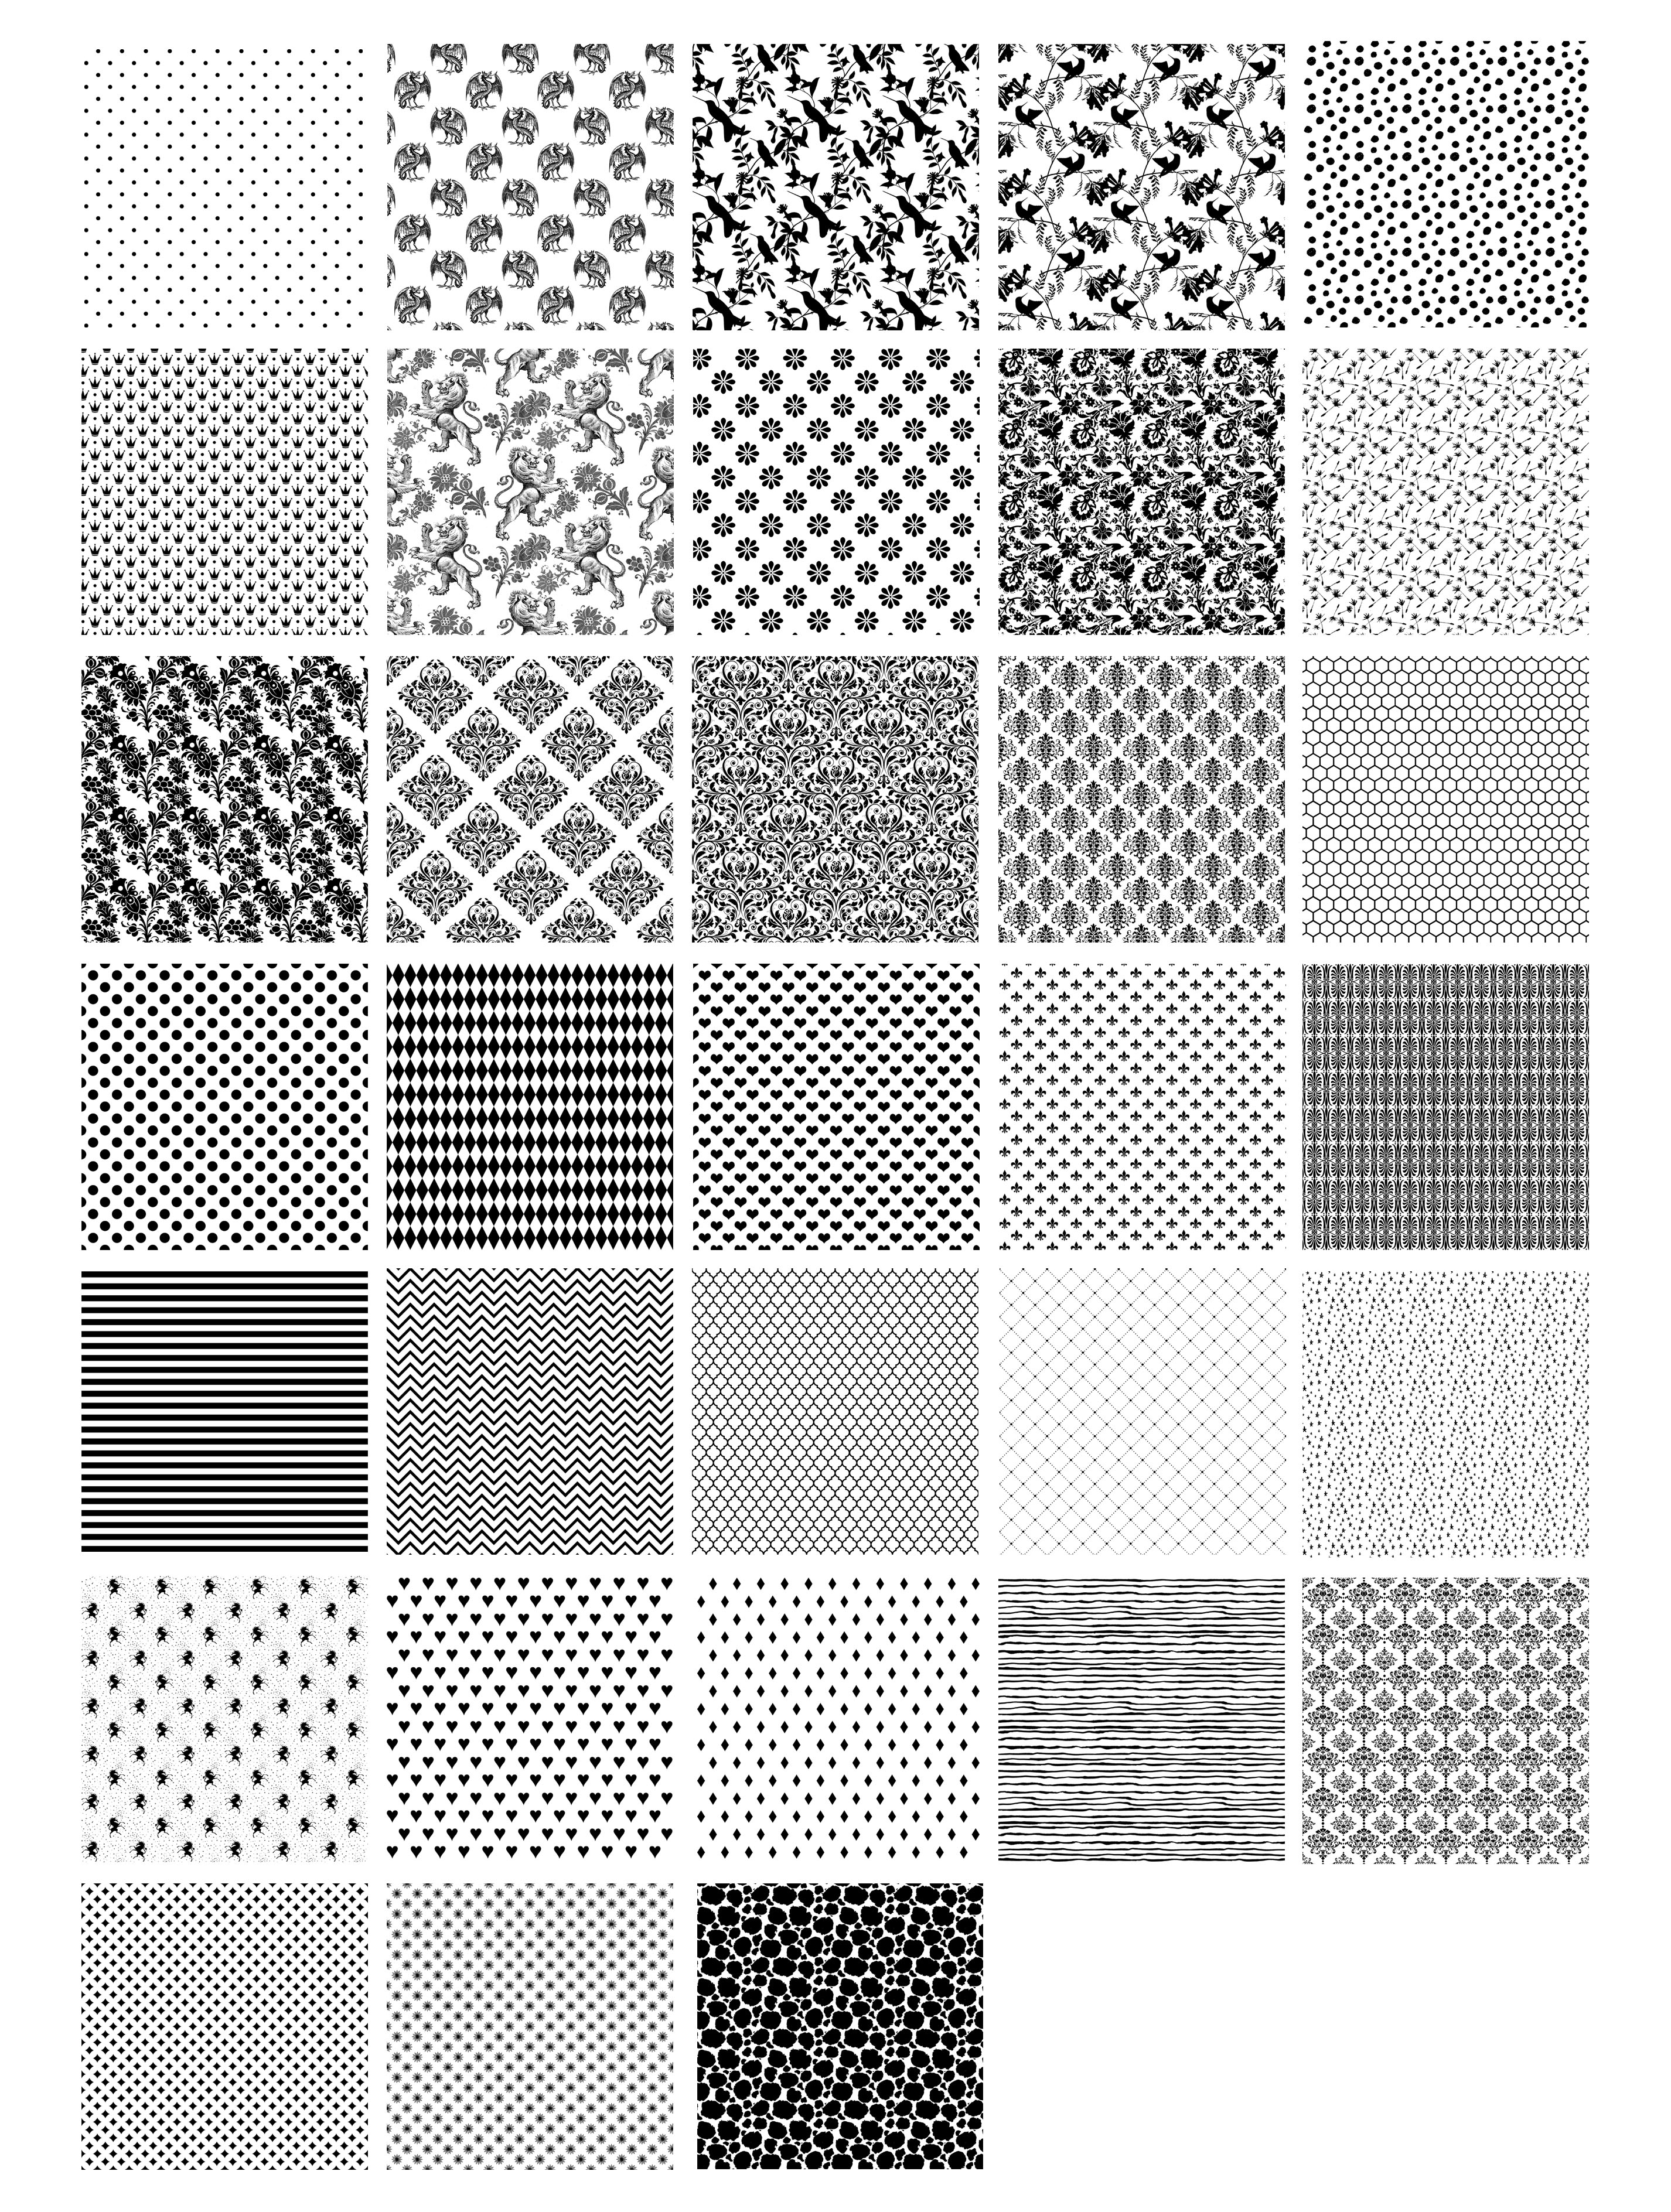 download pattern overlay photoshop